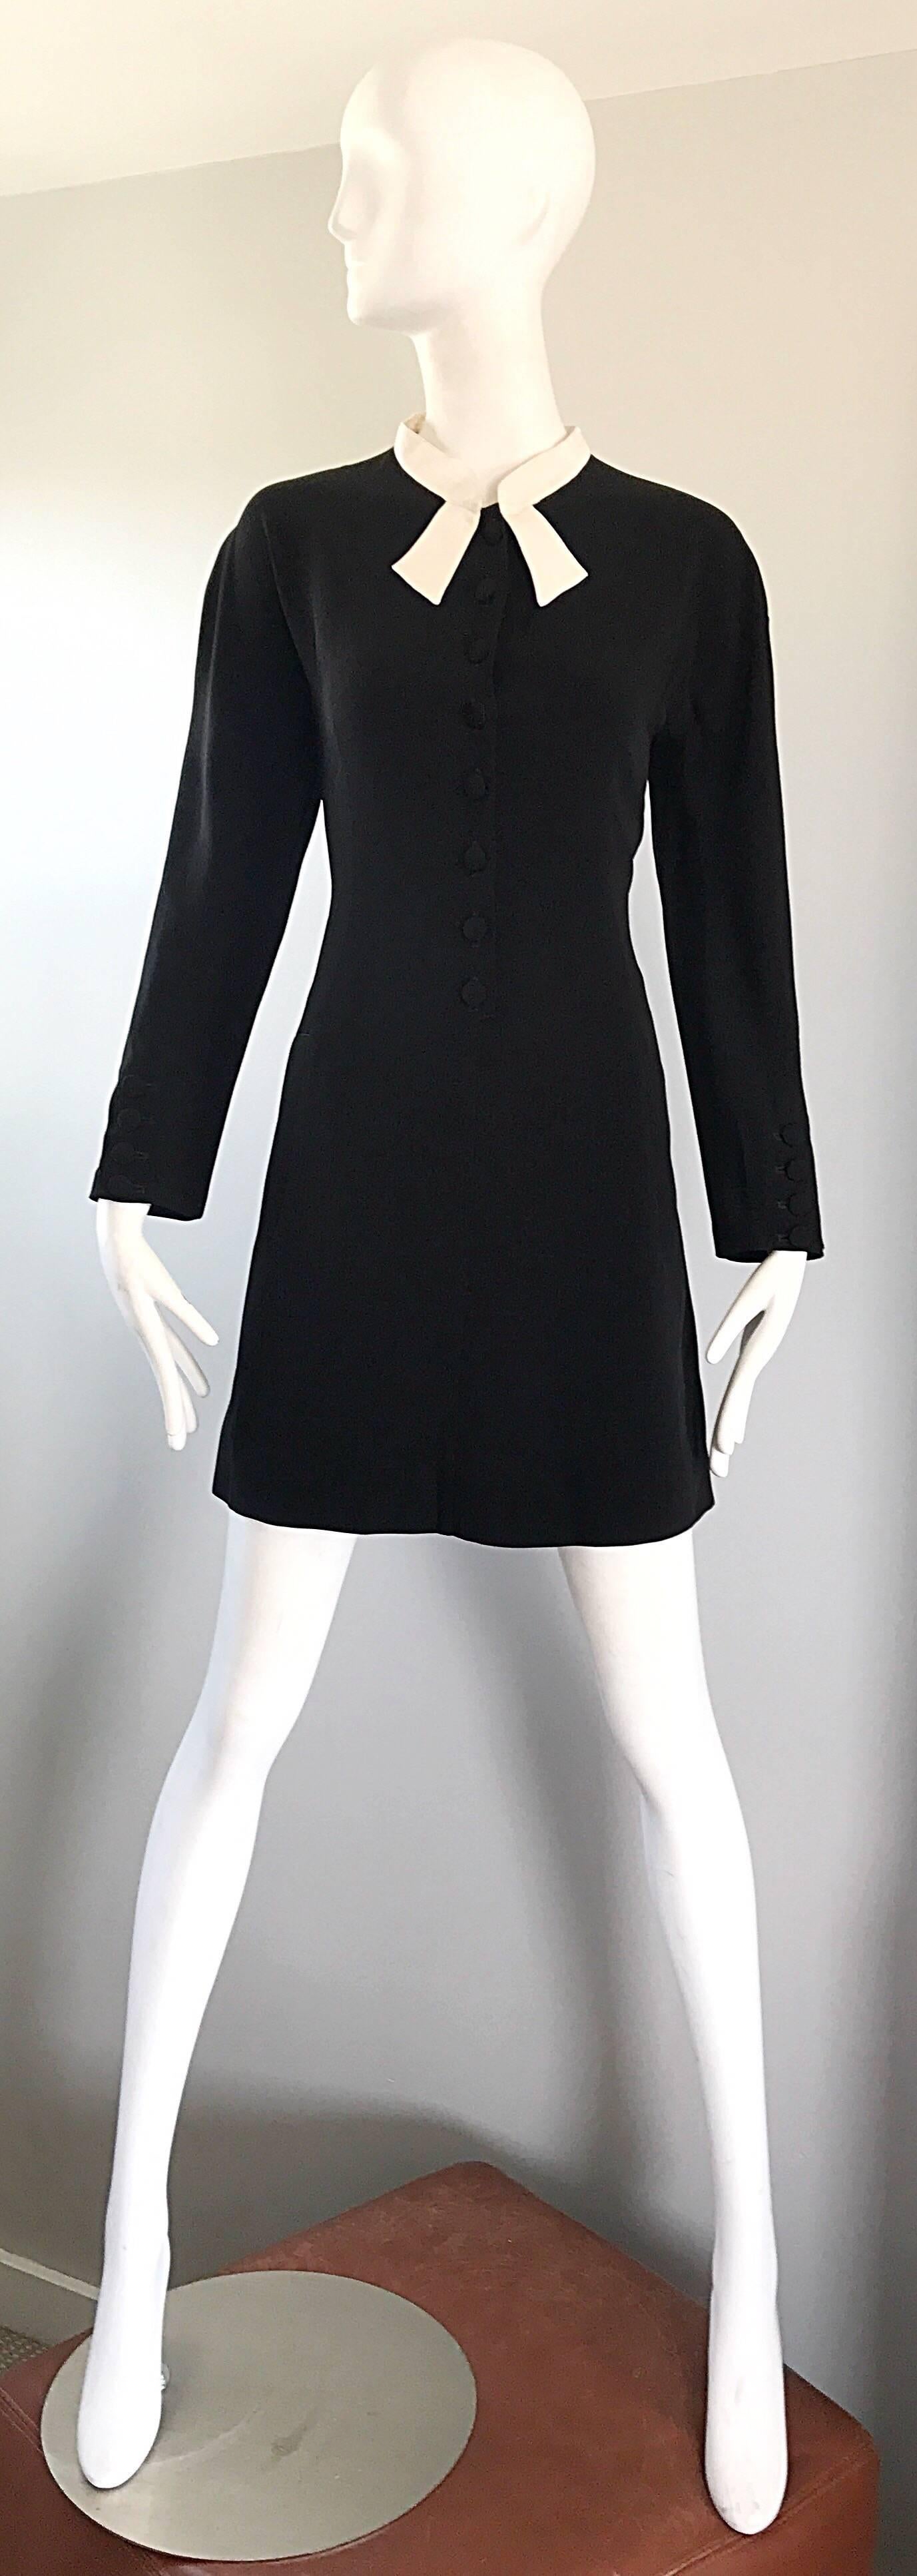 Lovely vintage KRIZIA black and white long sleeve 'tuxedo' dress! Features a tailored bodice with a loose fitting shift skirt. Attached white neck-tie detail. POCKETS at each side of the waist. Buttons up the front with hidden snap at top collar.